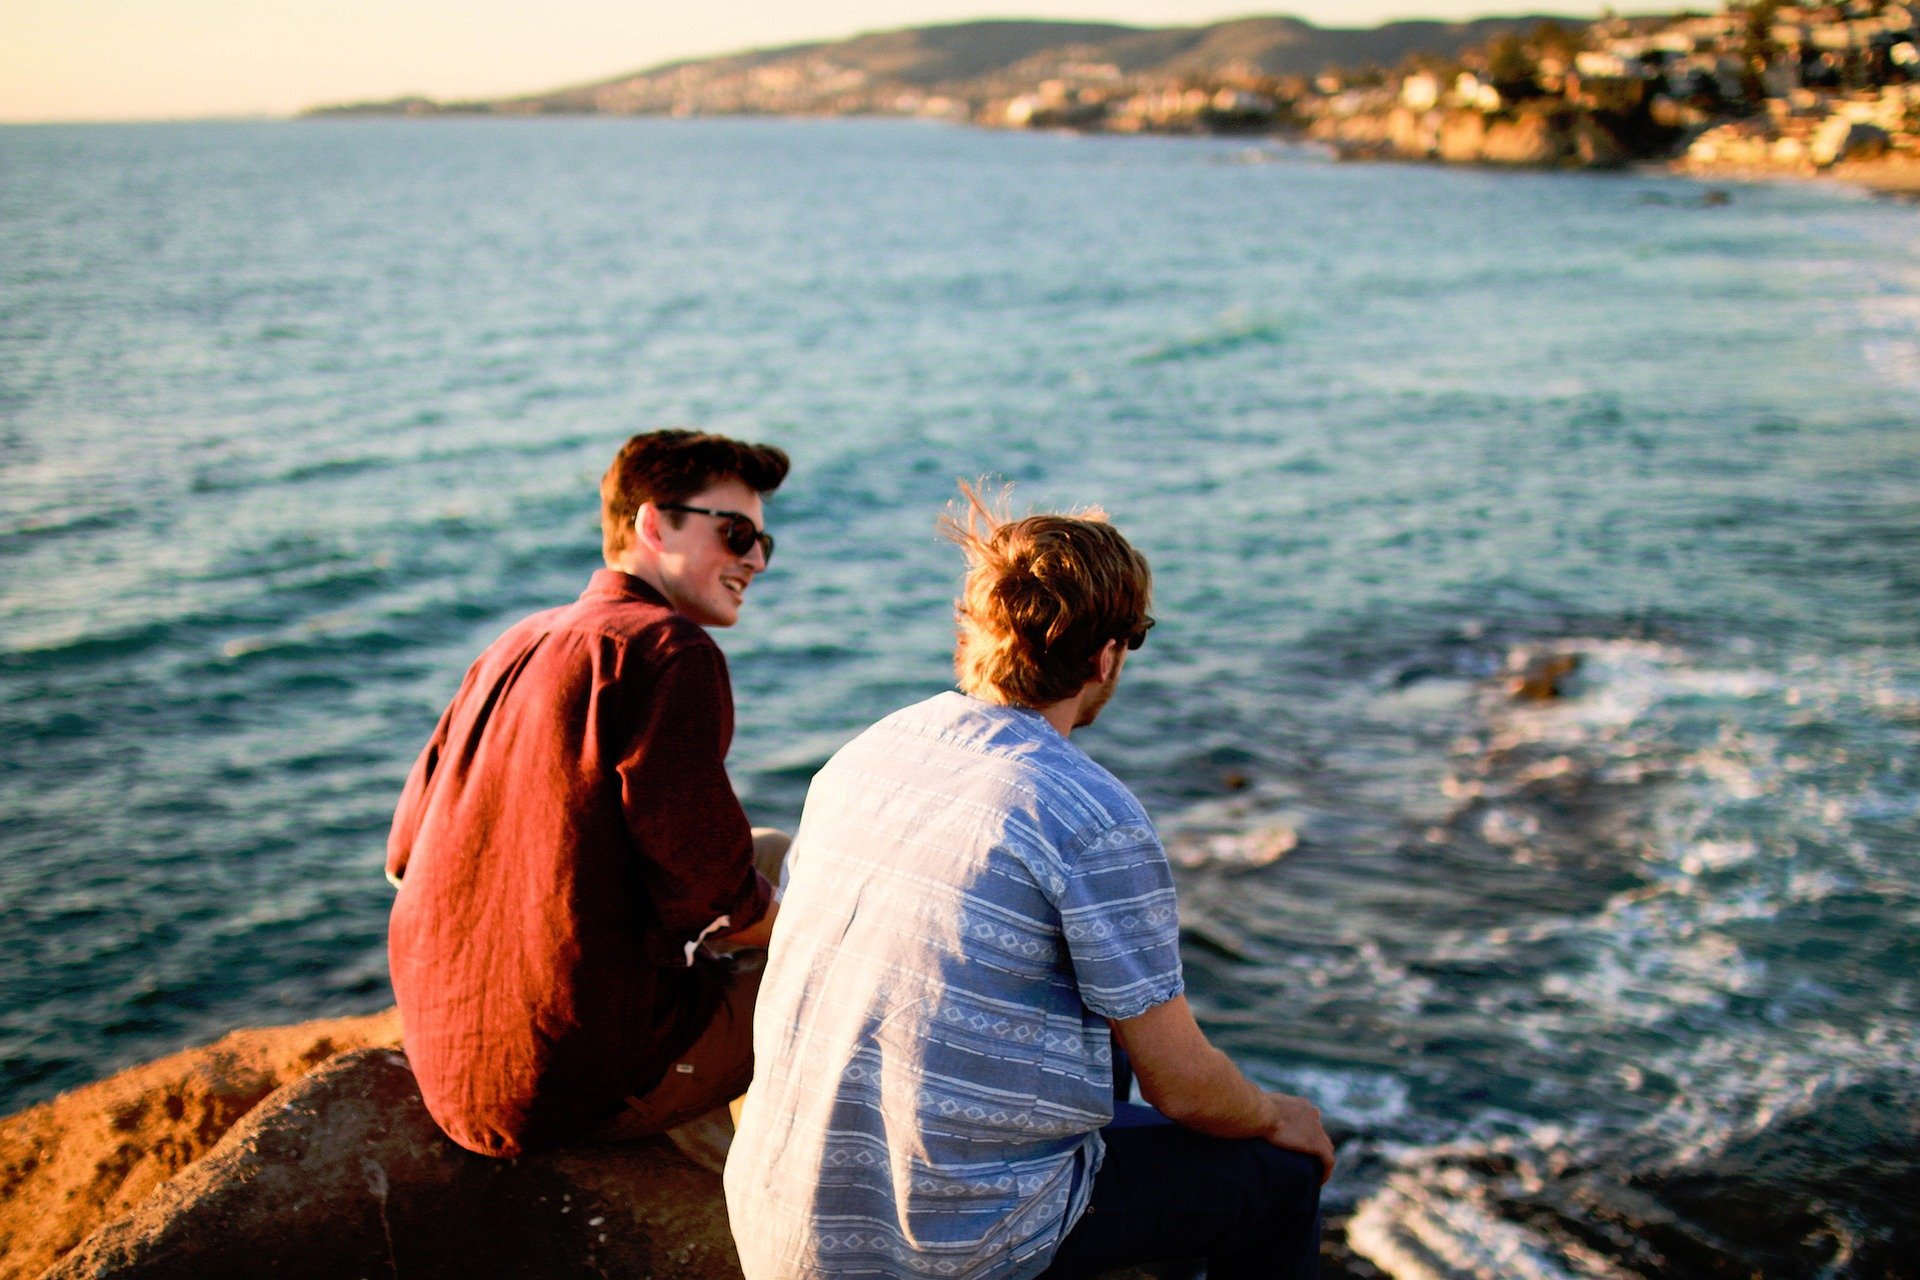 Pictured - Two men conversing while sitting on rocks near the ocean | Source: Pixabay